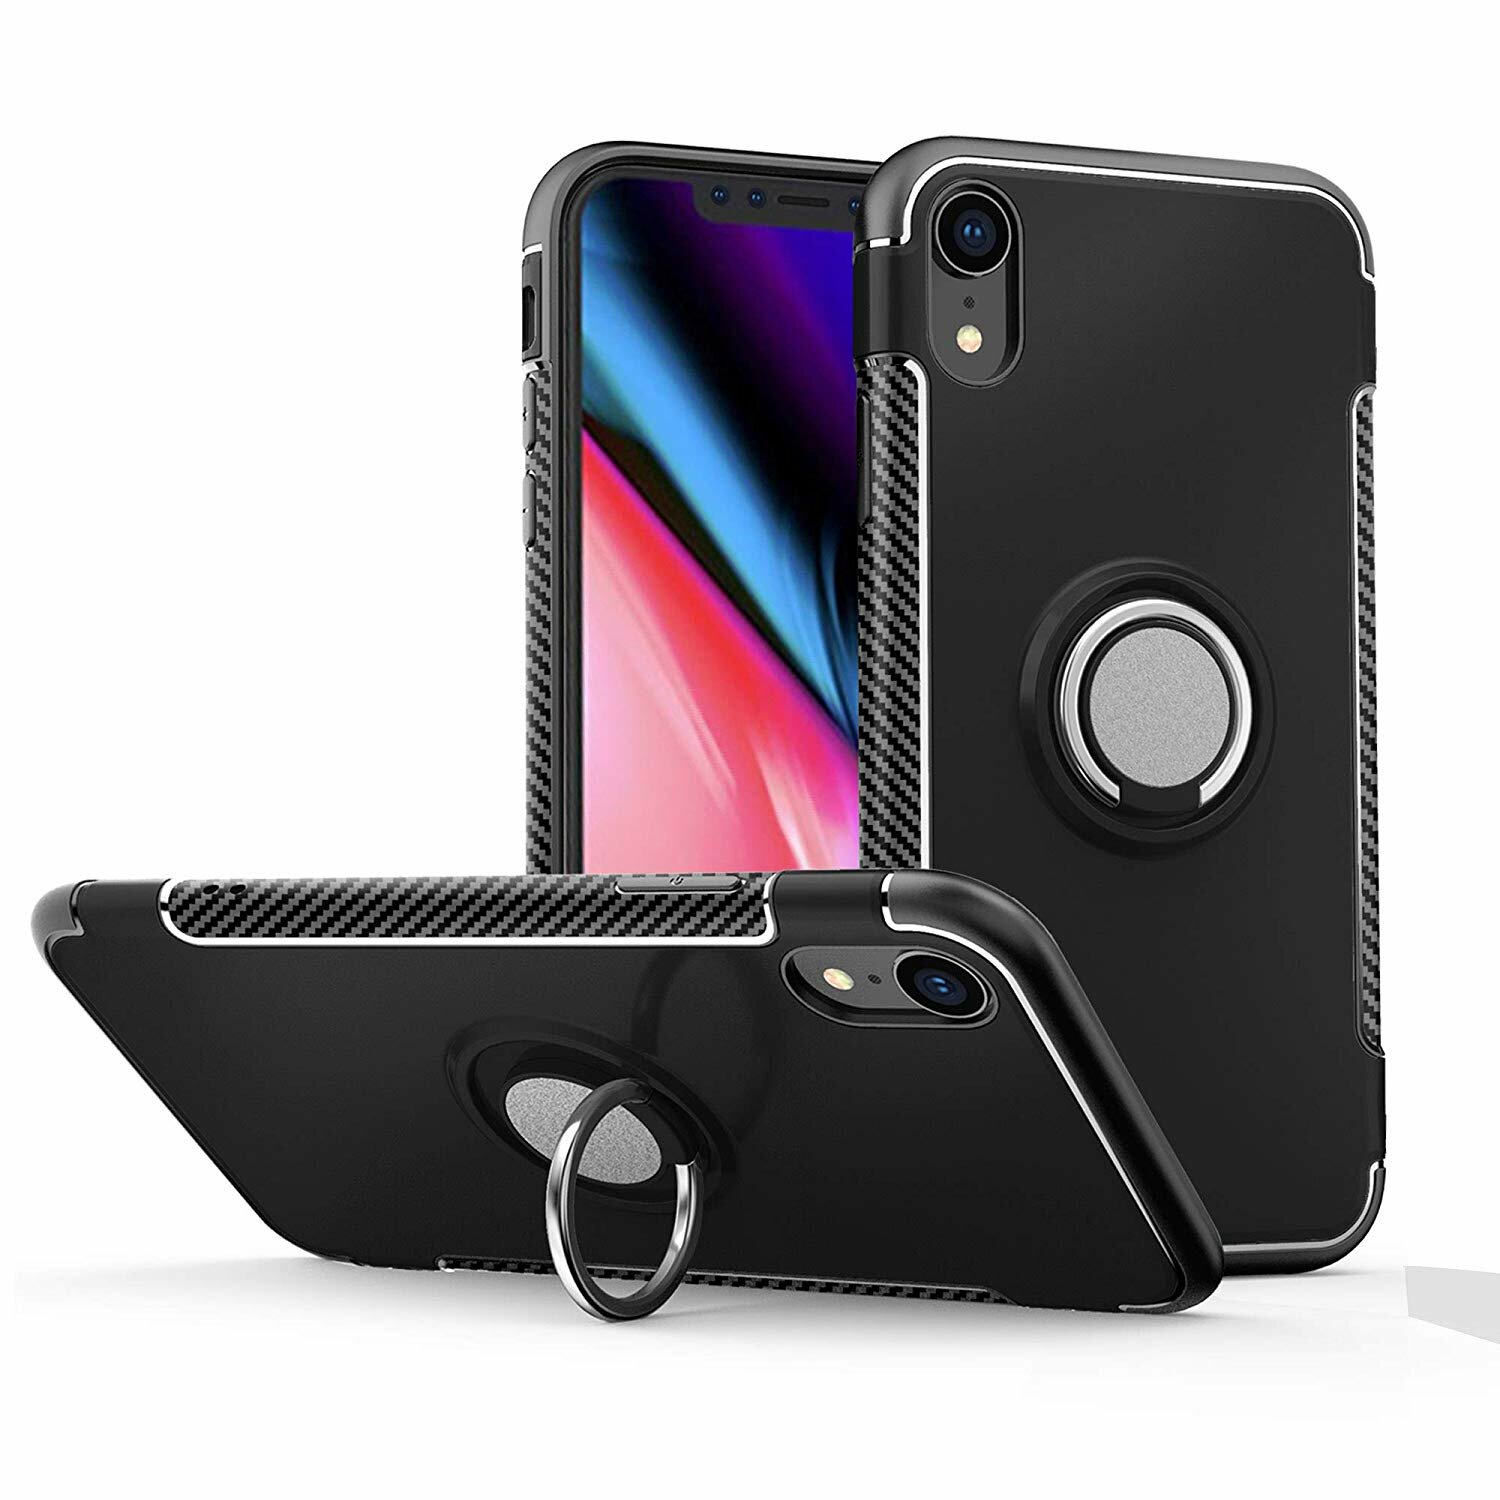 Bakeey Protective Case For iPhone XR Ring Grip Kickstand Stand Holder Back Cover